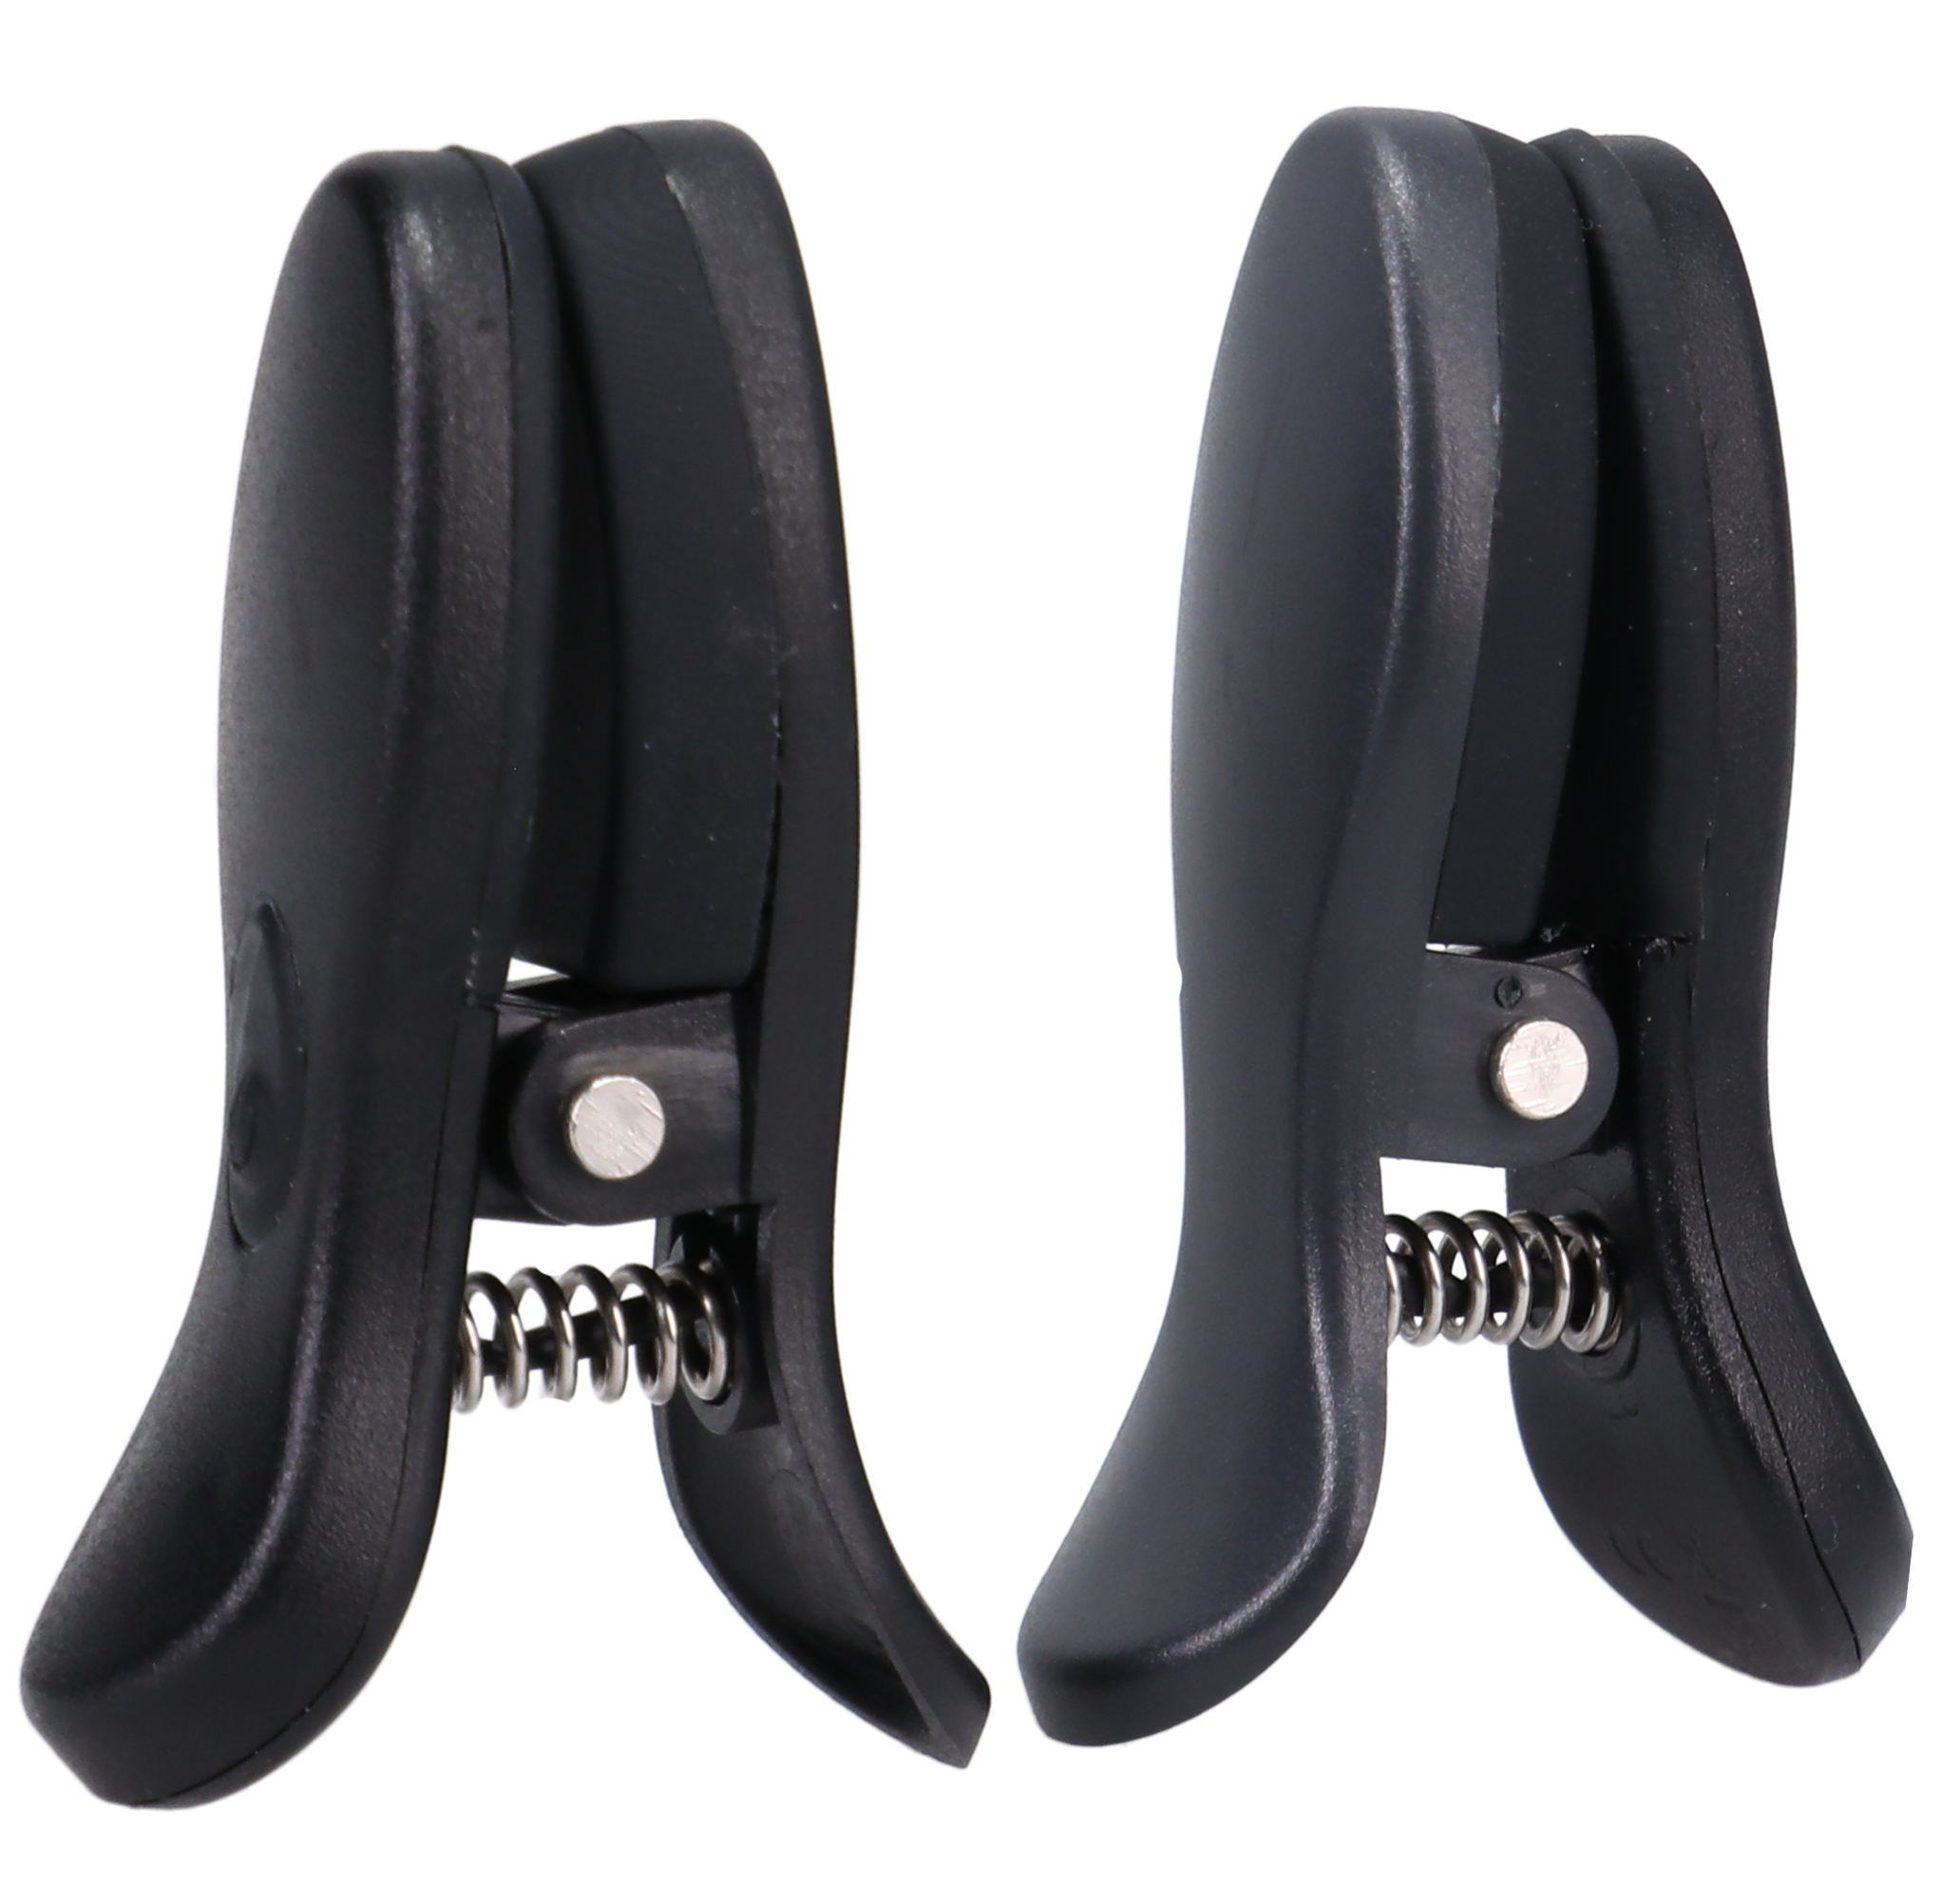 Merci Vibro Grippers Wireless Vibrating Nipple Clamps with Rechargeable Case